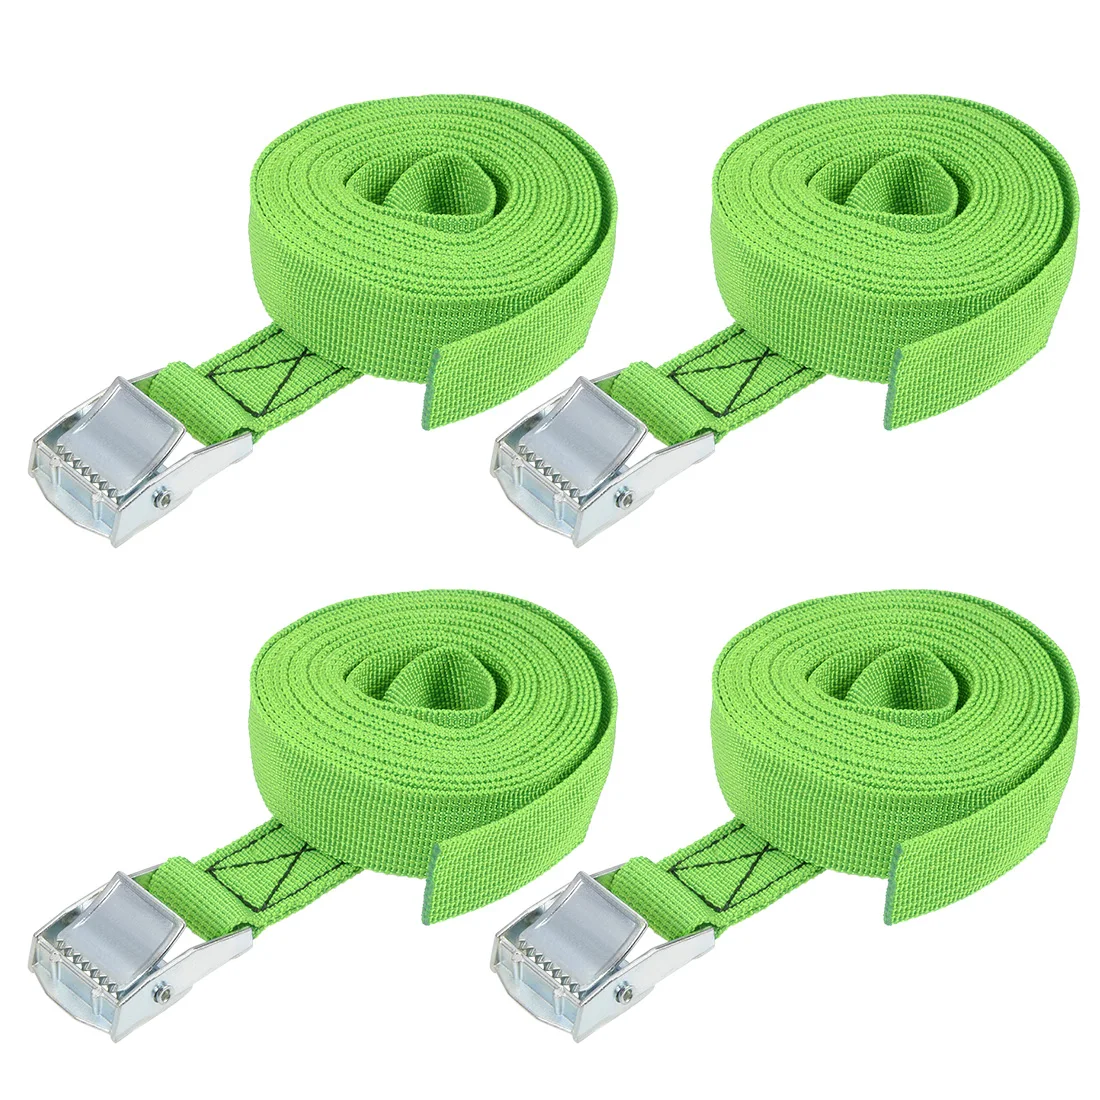 

uxcell Lashing Strap Cargo Tie Down Straps with Cam Lock Buckle Up to 551lbs 1.6' - 39' Length 4pcs 4pcs 25mmx3.5M Green